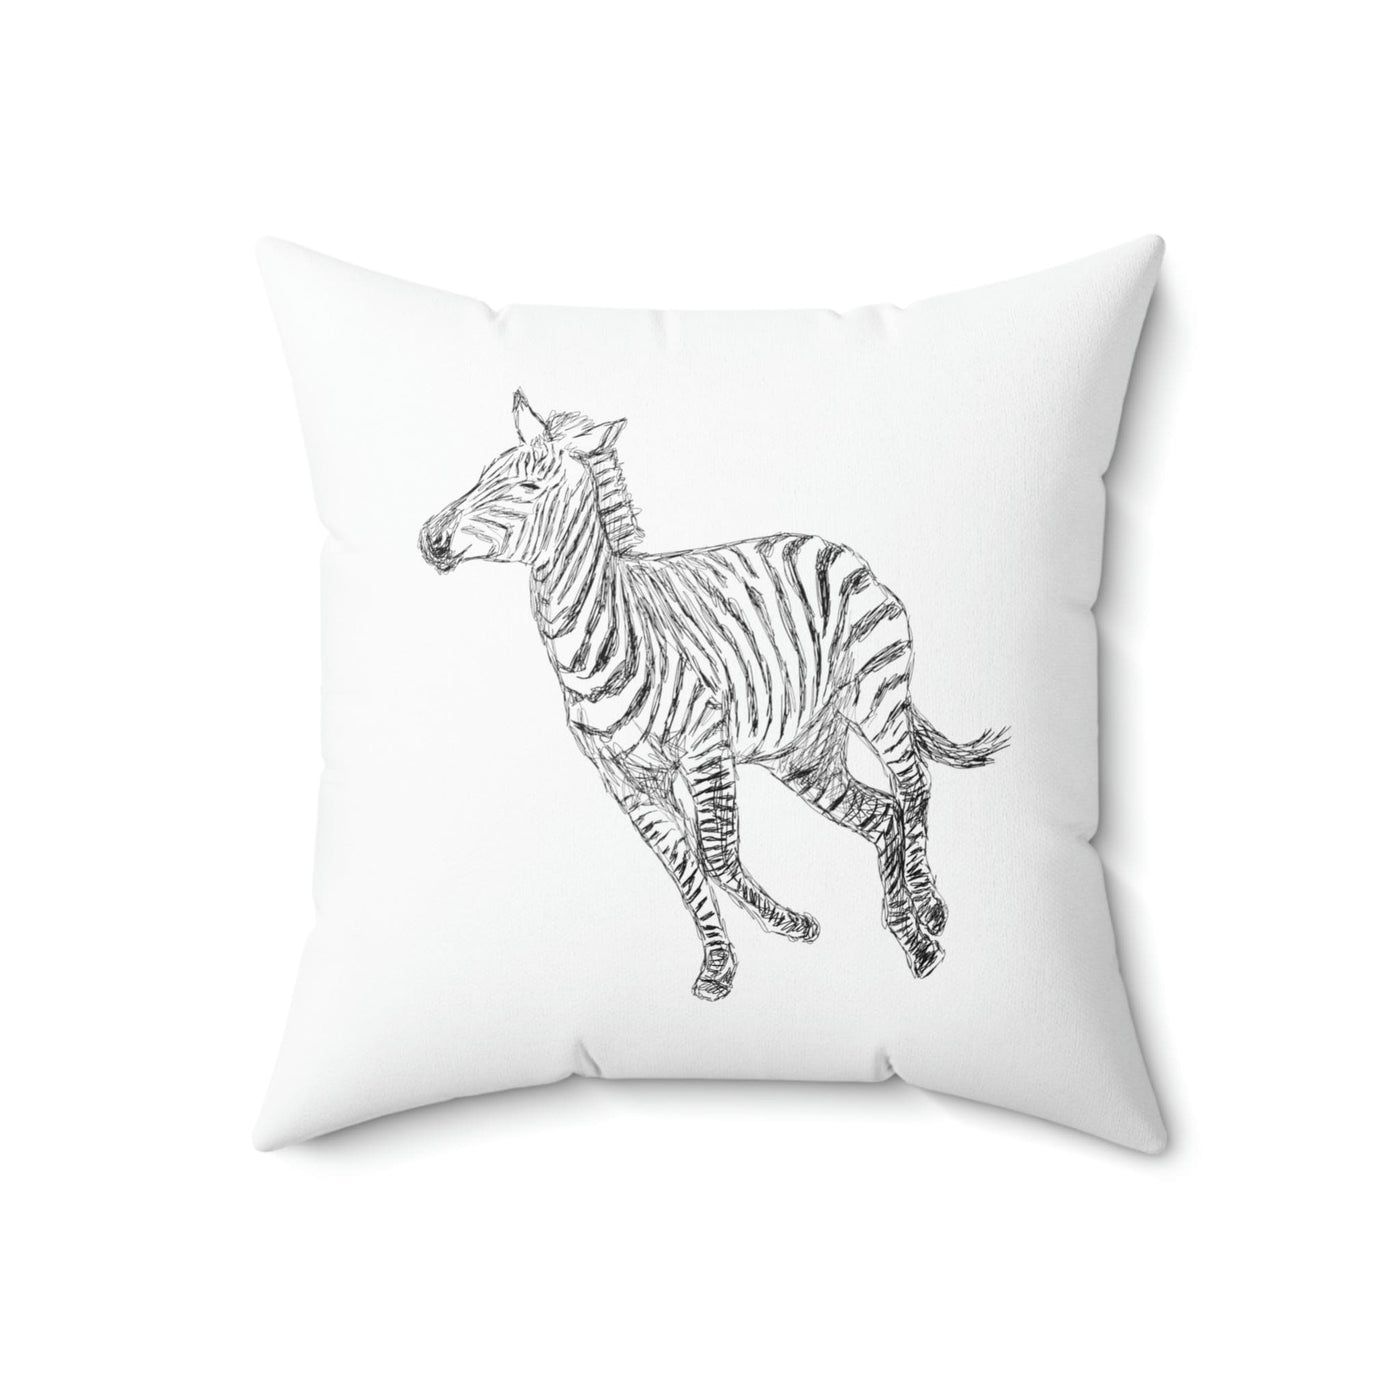 Throw Pillow Cover Galloping Zebra Line Art Drawing Print 2 - sided Print